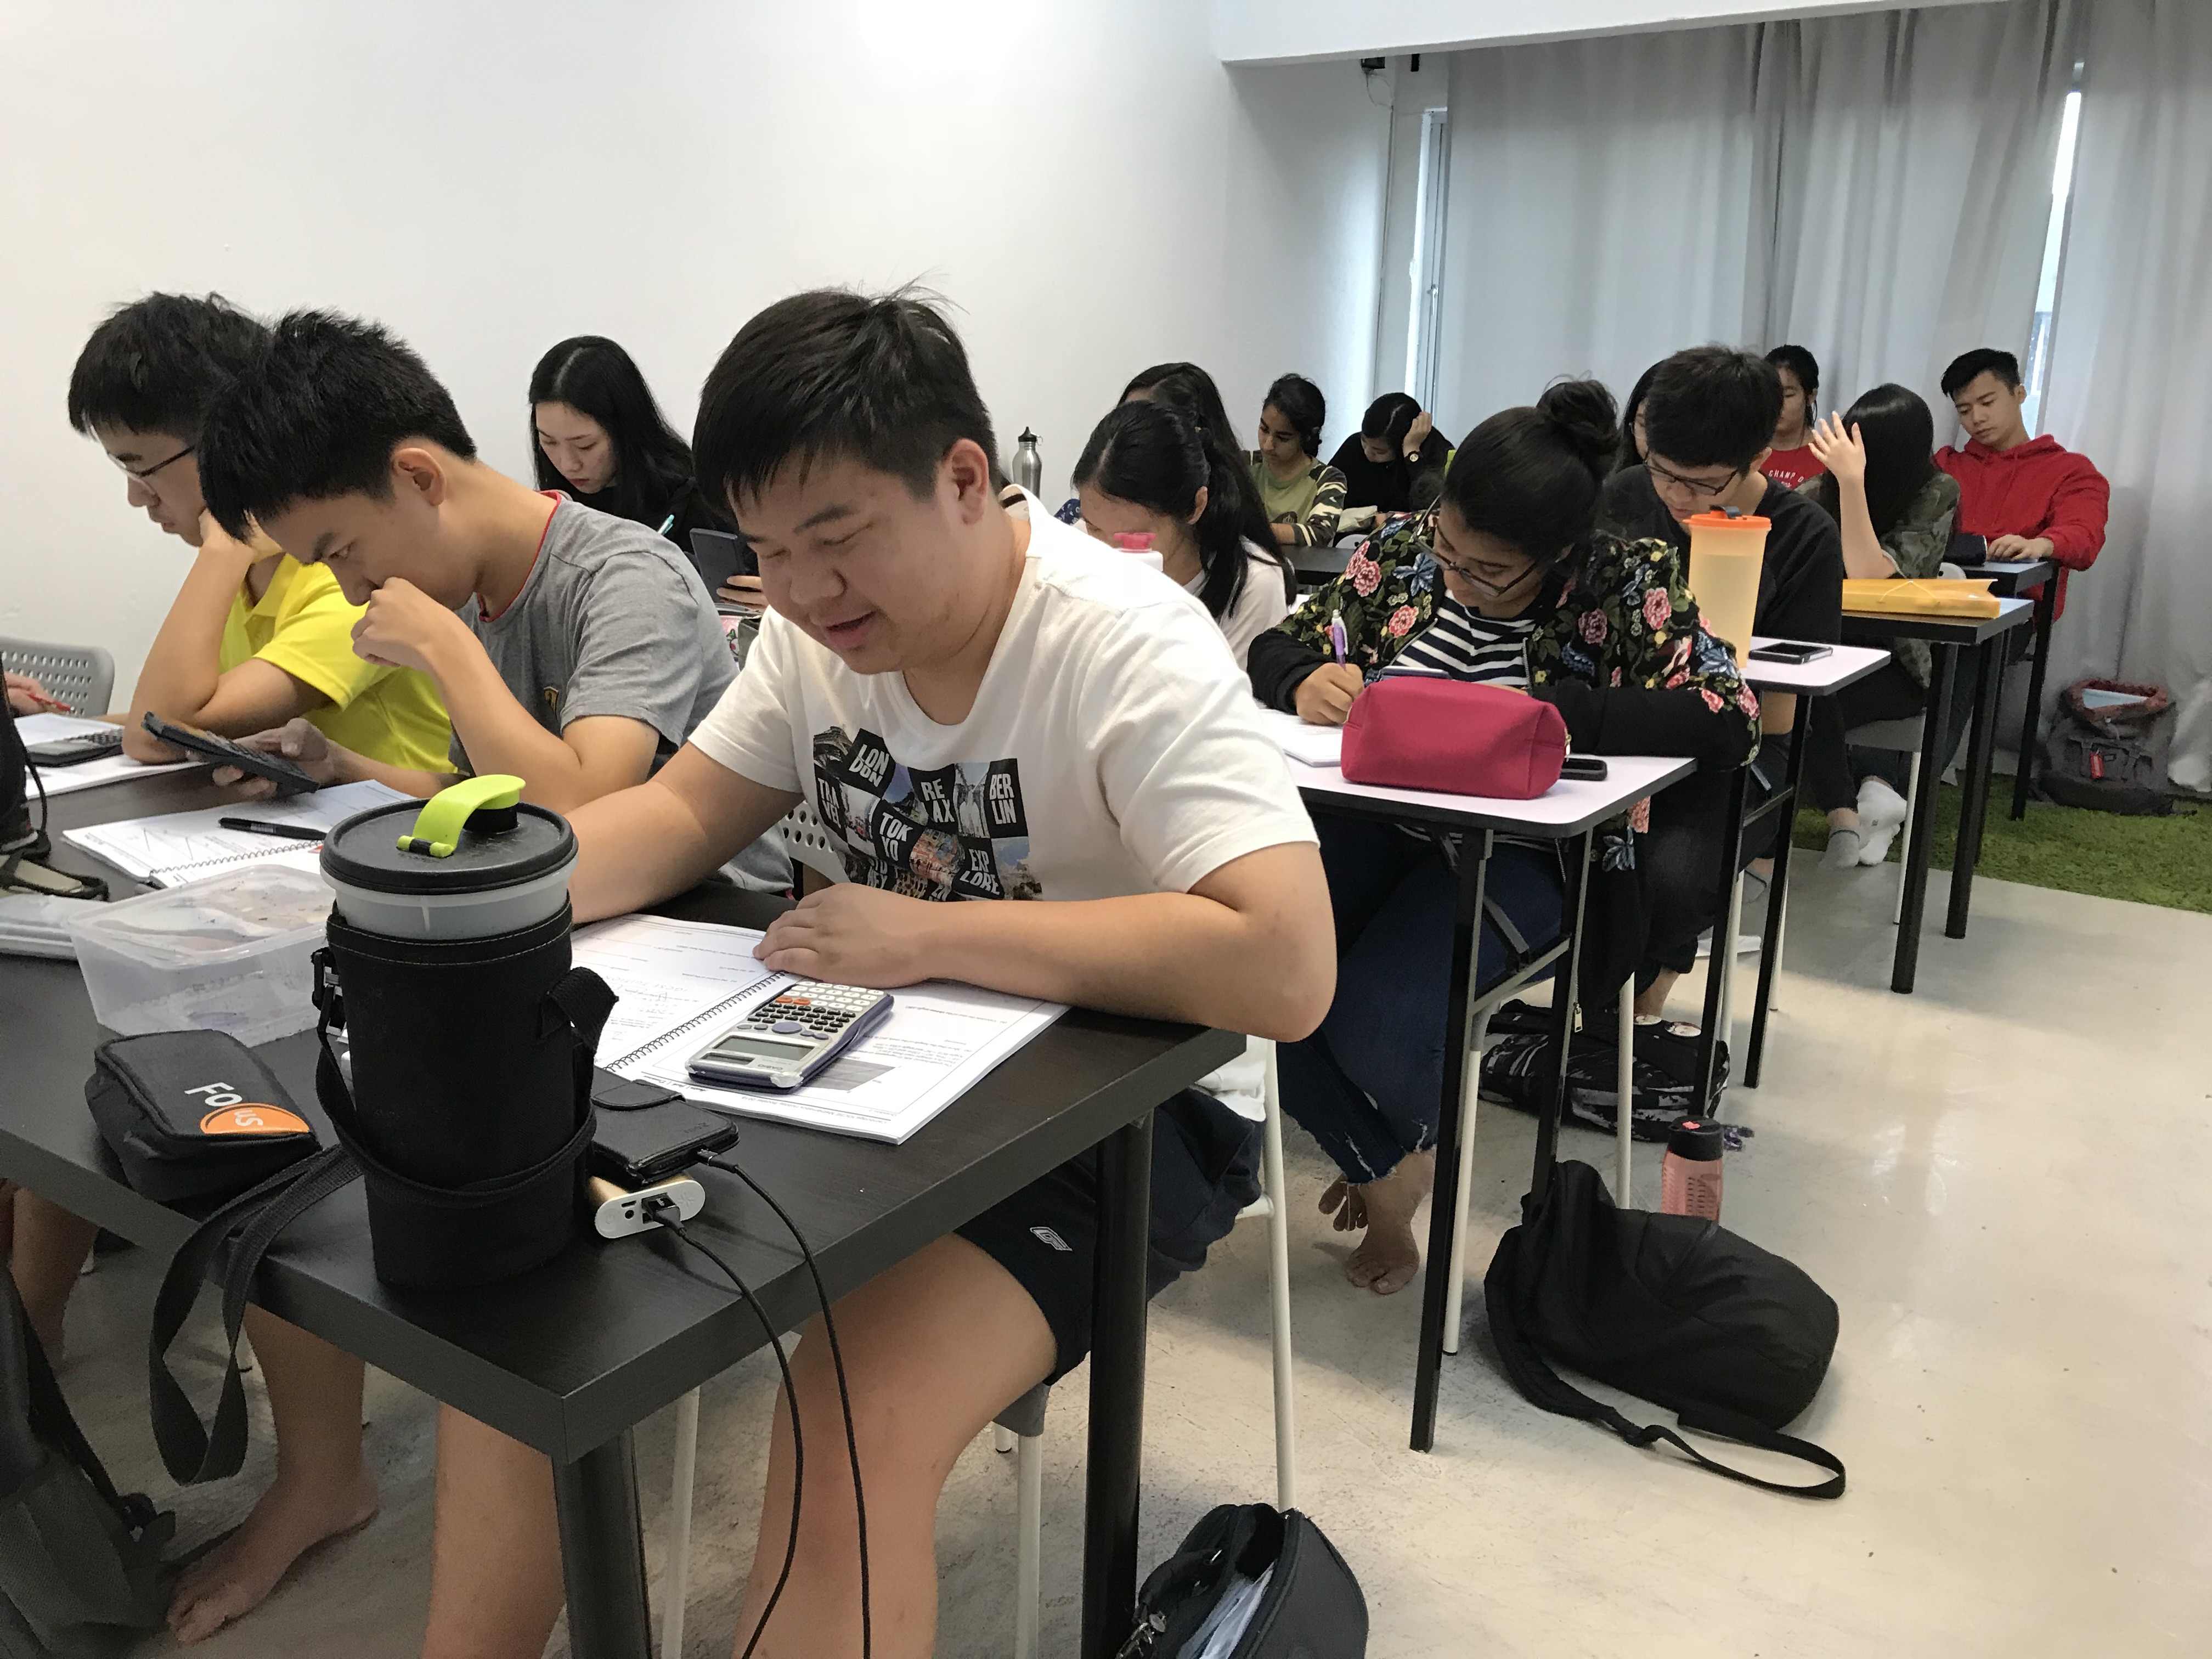 igcse intensive course,intensive course,vbest,igcse,intensive booster,igcse booster,igcse intensive 🏆 Booster - IGCSE Intensive Course Aug Sept 2023 VBest Year 1 to Year 13 Tuition Centre